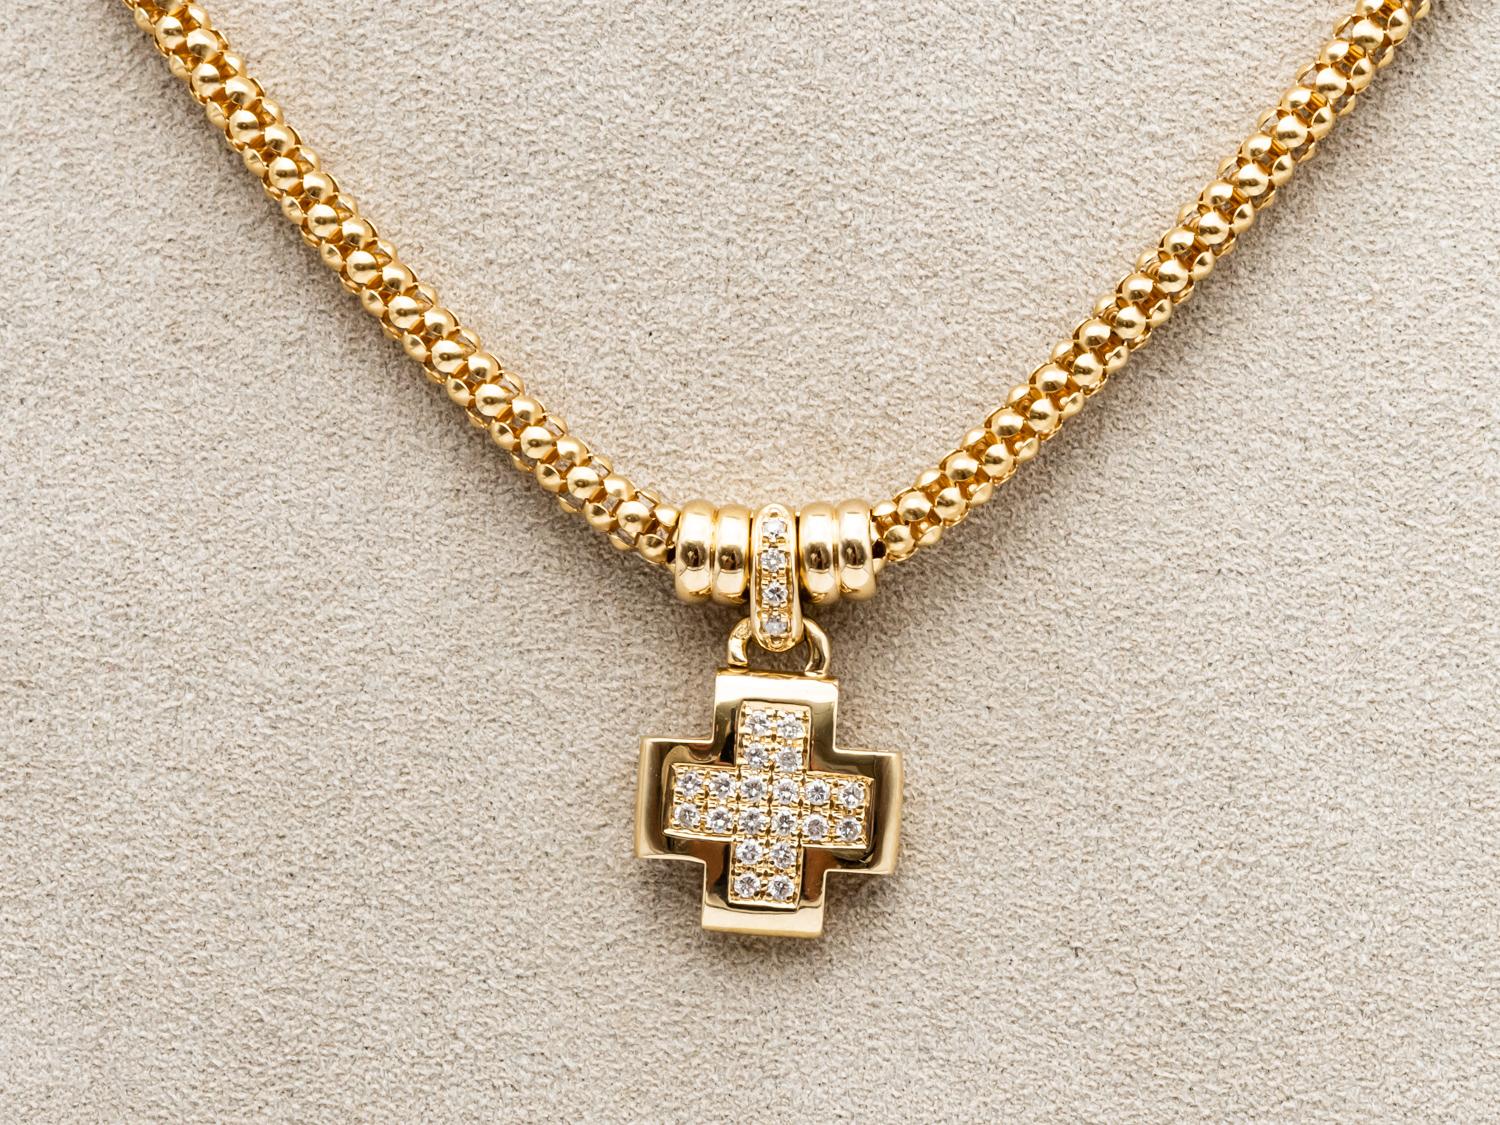 Yellow Gold 18 Karat Necklace with a Cross Pendant Articulated Diamond Paving 1